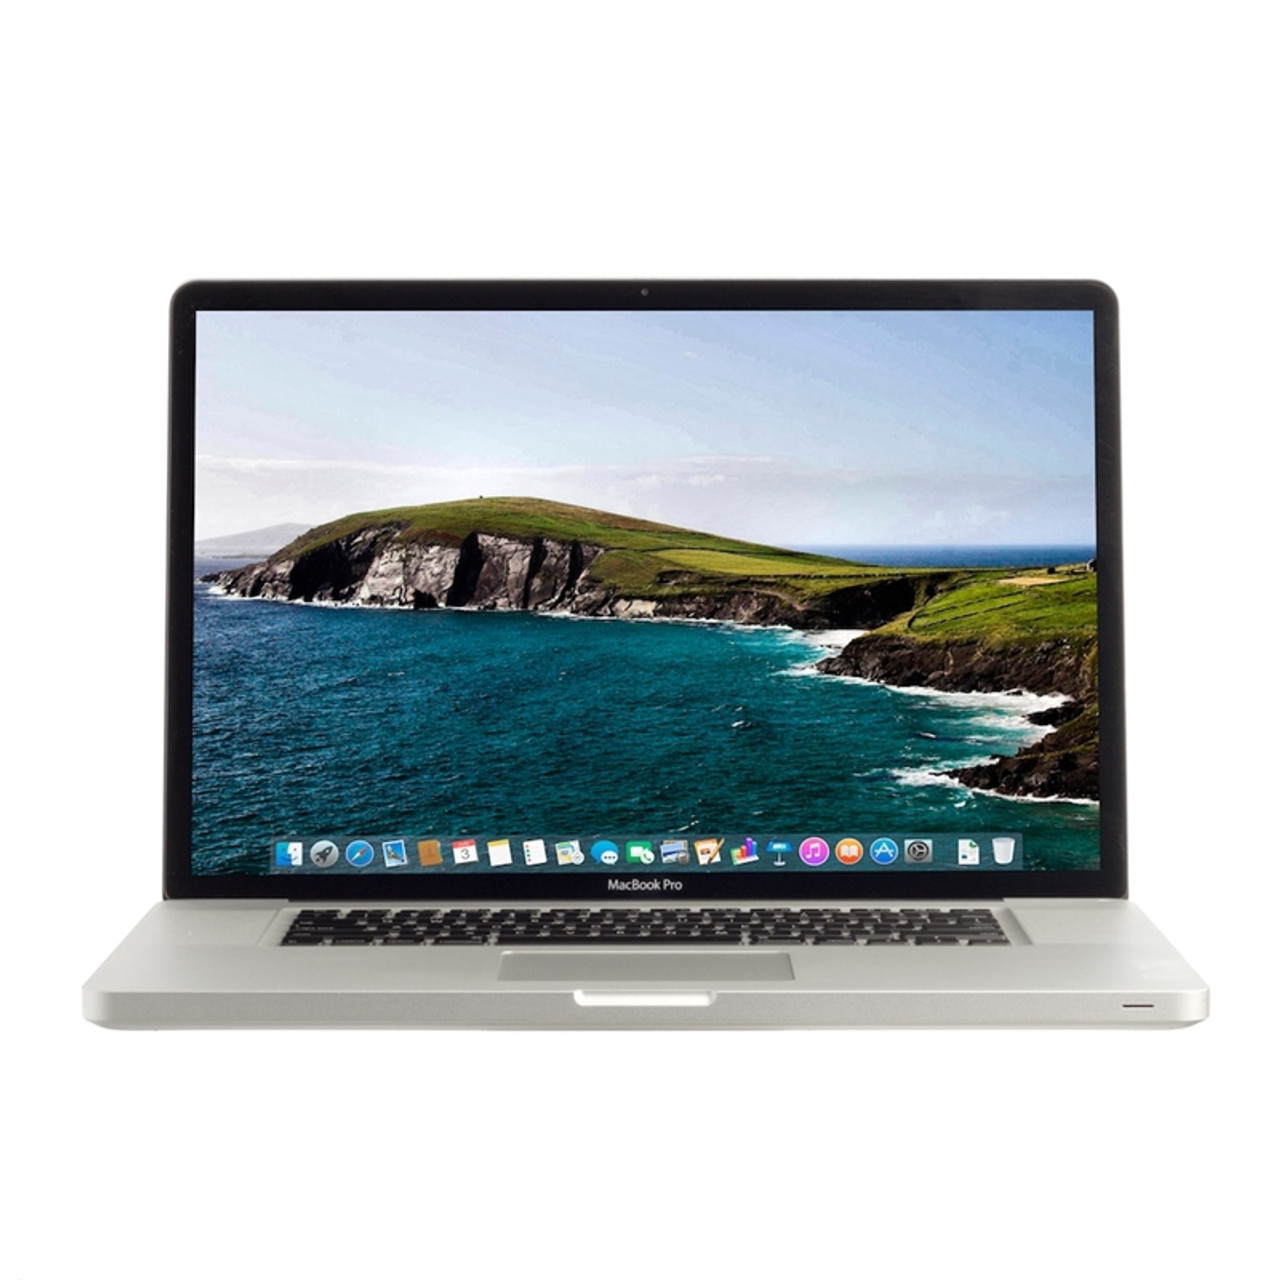 Vintage: Apple MacBook Pro 17-inch (Hi-Res Glossy) 2.5GHz Quad-core i7  (Late 2011) MD311LL/A - Good Condition